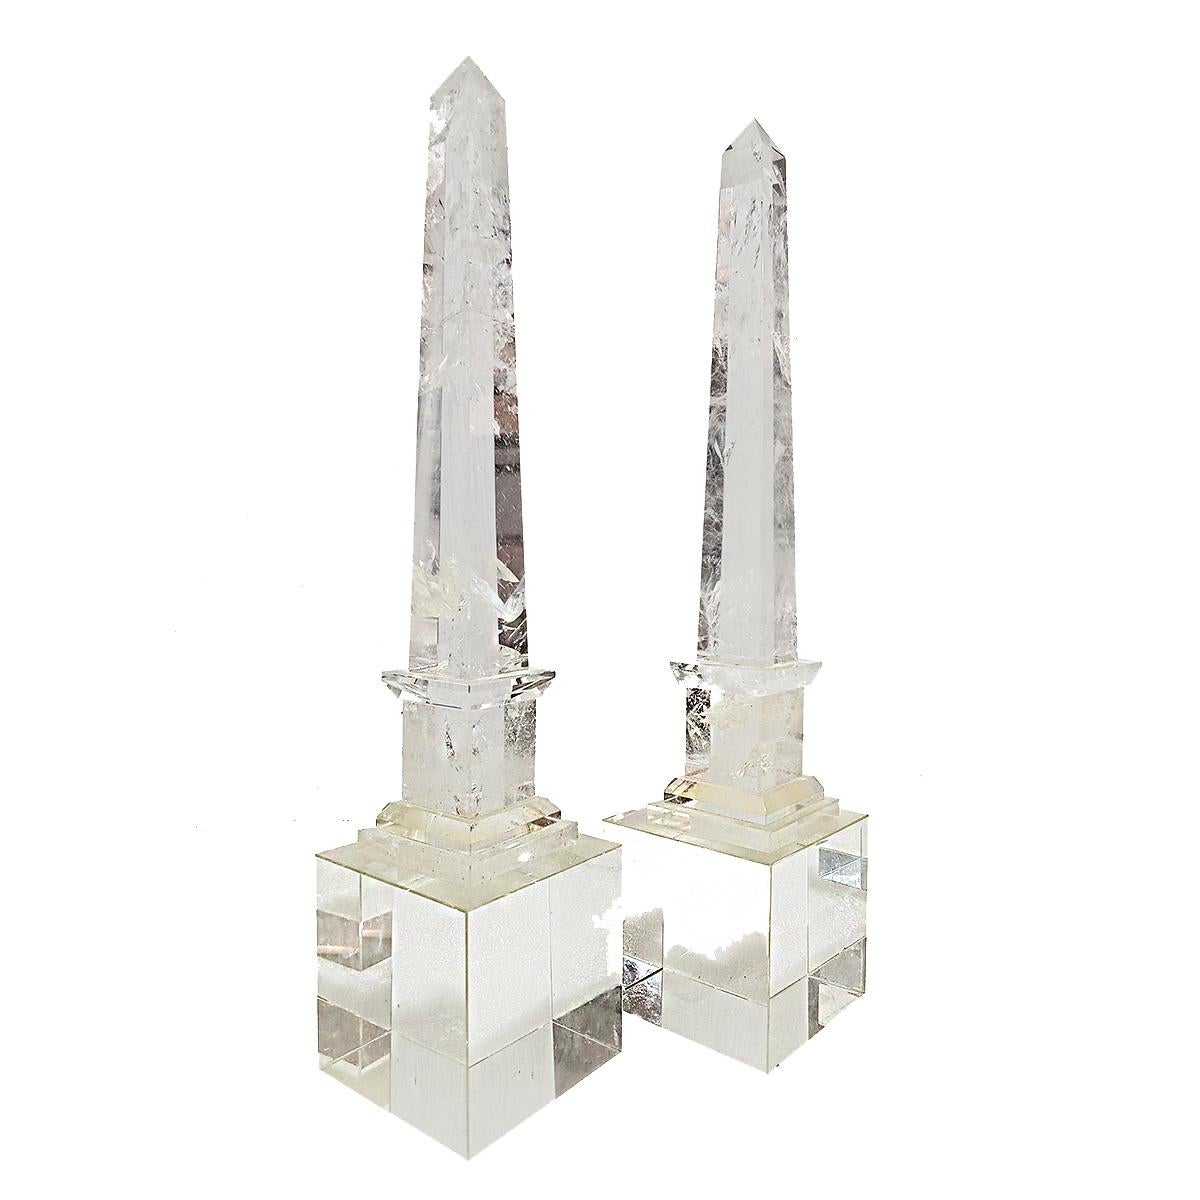 A pair of Continental Rock Crystal obelisks, from France, late 19th Century. 

The obelisks proper are 12 inches high, each mounted on a 4-inch crystal cube of a later date, for a total height of 18 inches. The obelisks are in their original